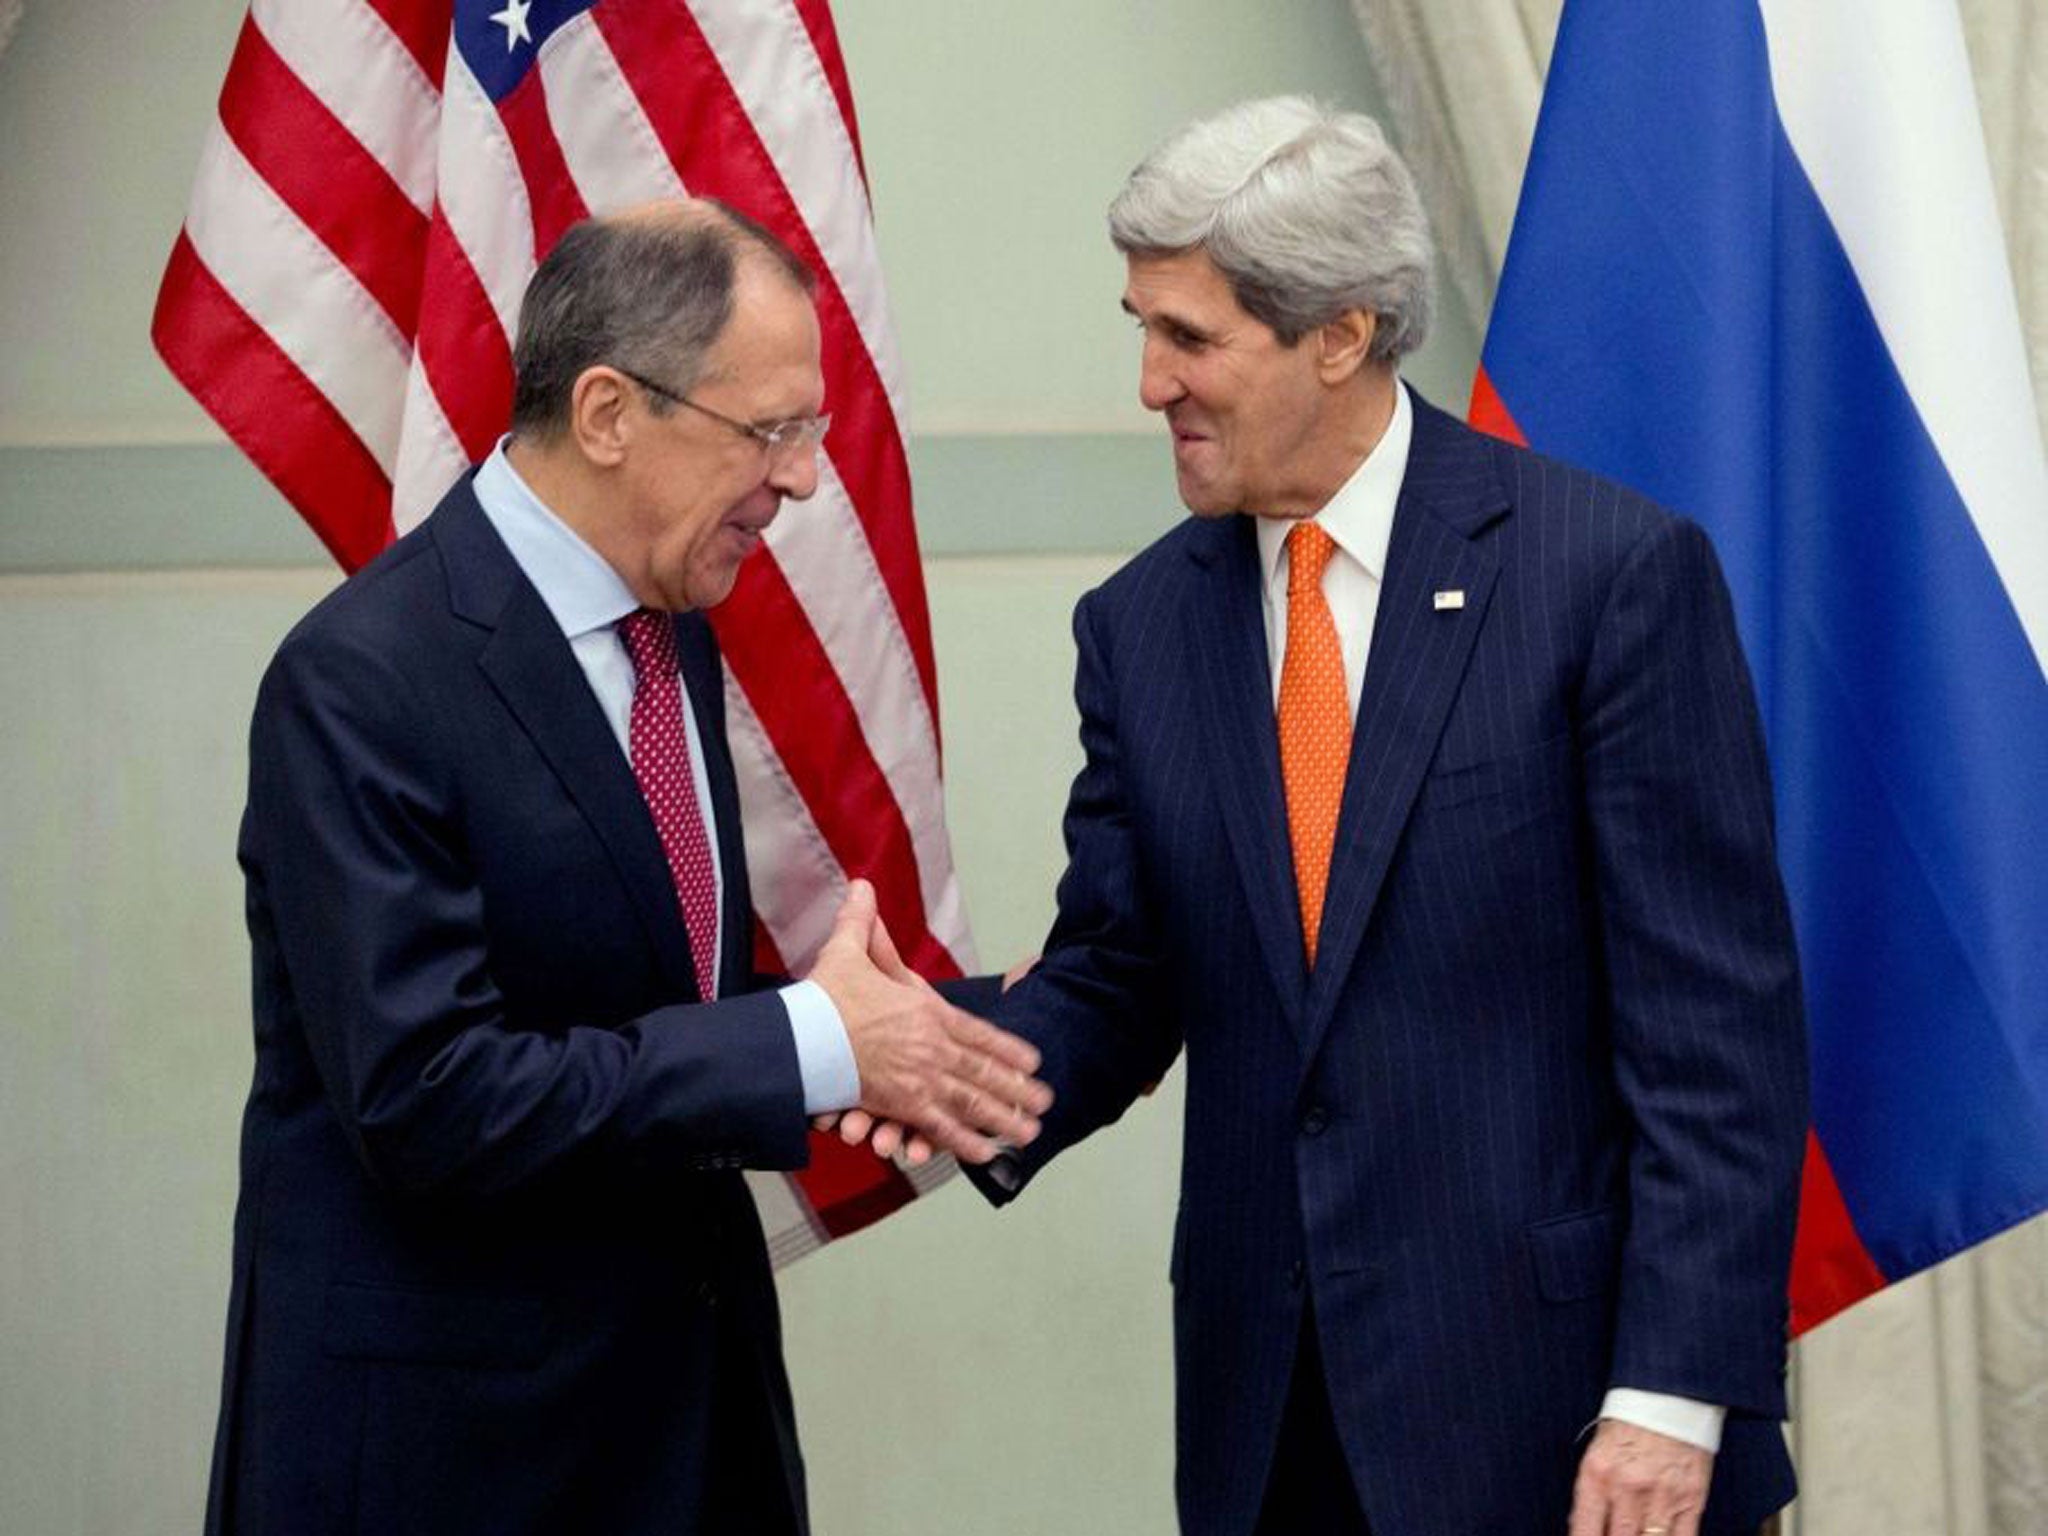 US Secretary of State John Kerry (R) shakes hands with Russia's Foreign Minister Sergei Lavrov before the start of their meeting in Paris, 13 January 2014